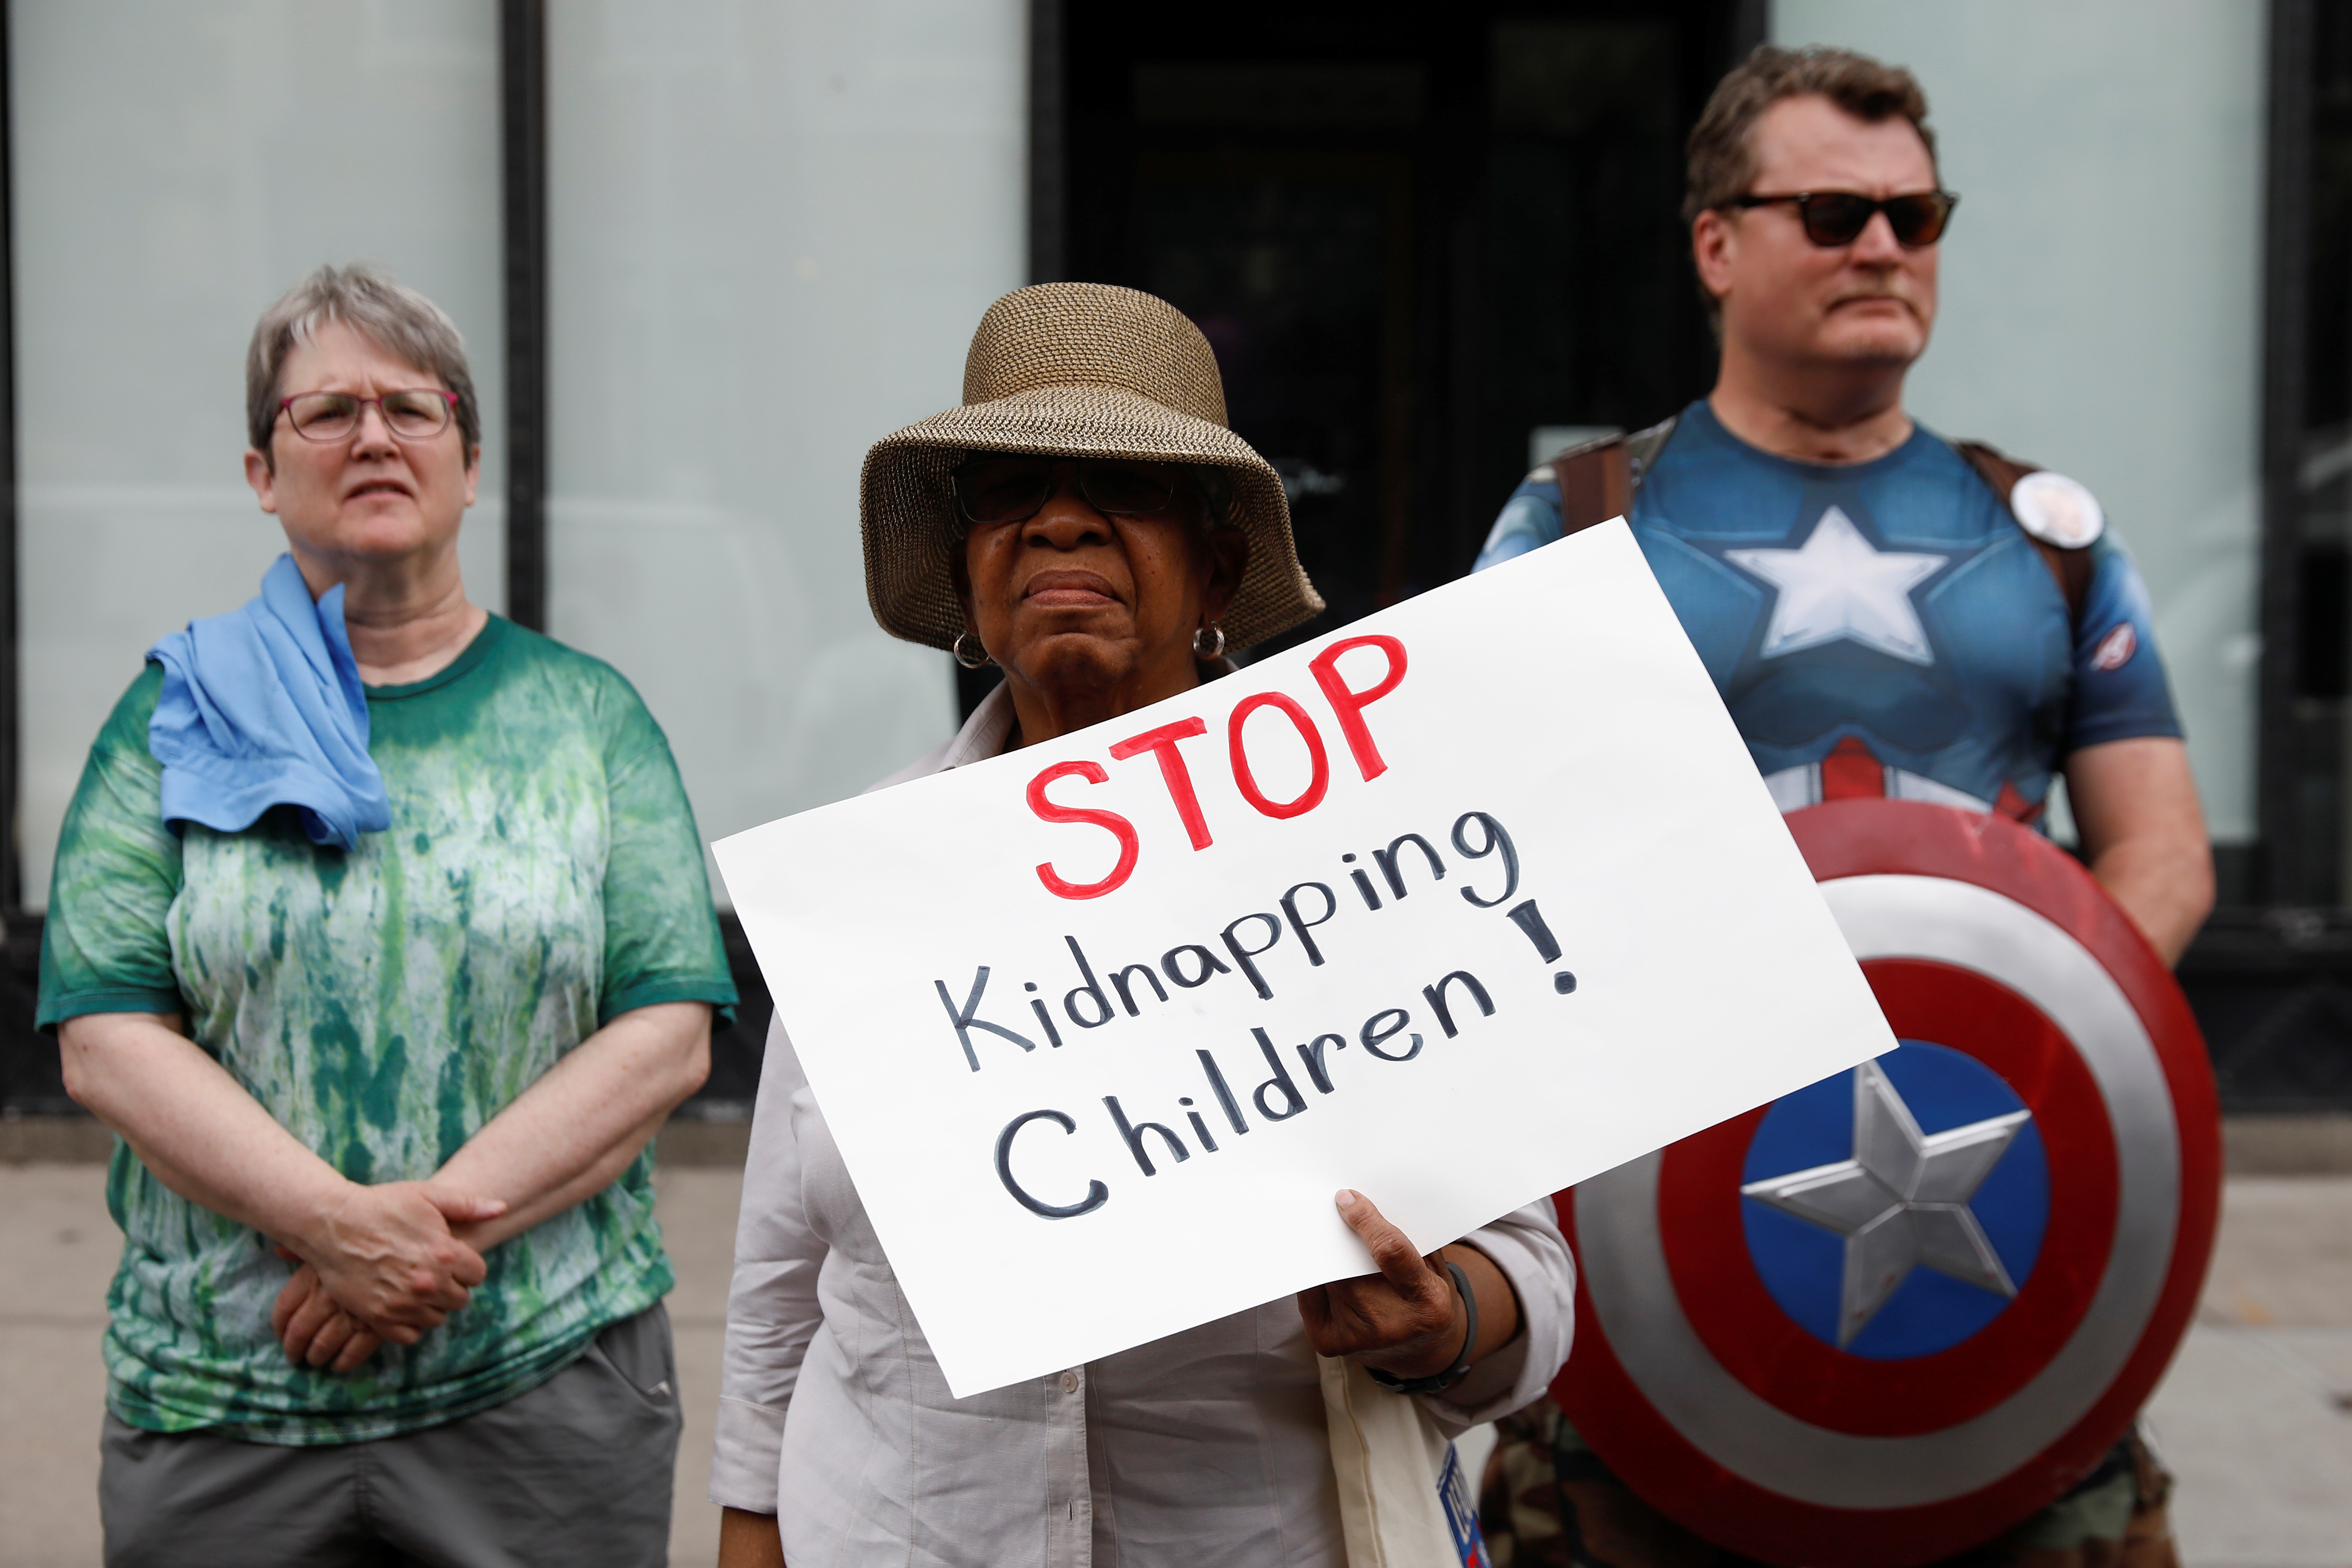 Demonstrators stand during a 'Close the Camps' rally to demand the closure of inhumane immigrant detention centers outside the Middle Collegiate Church in New York, U.S., July 2, 2019.  REUTERS/Shannon Stapleton